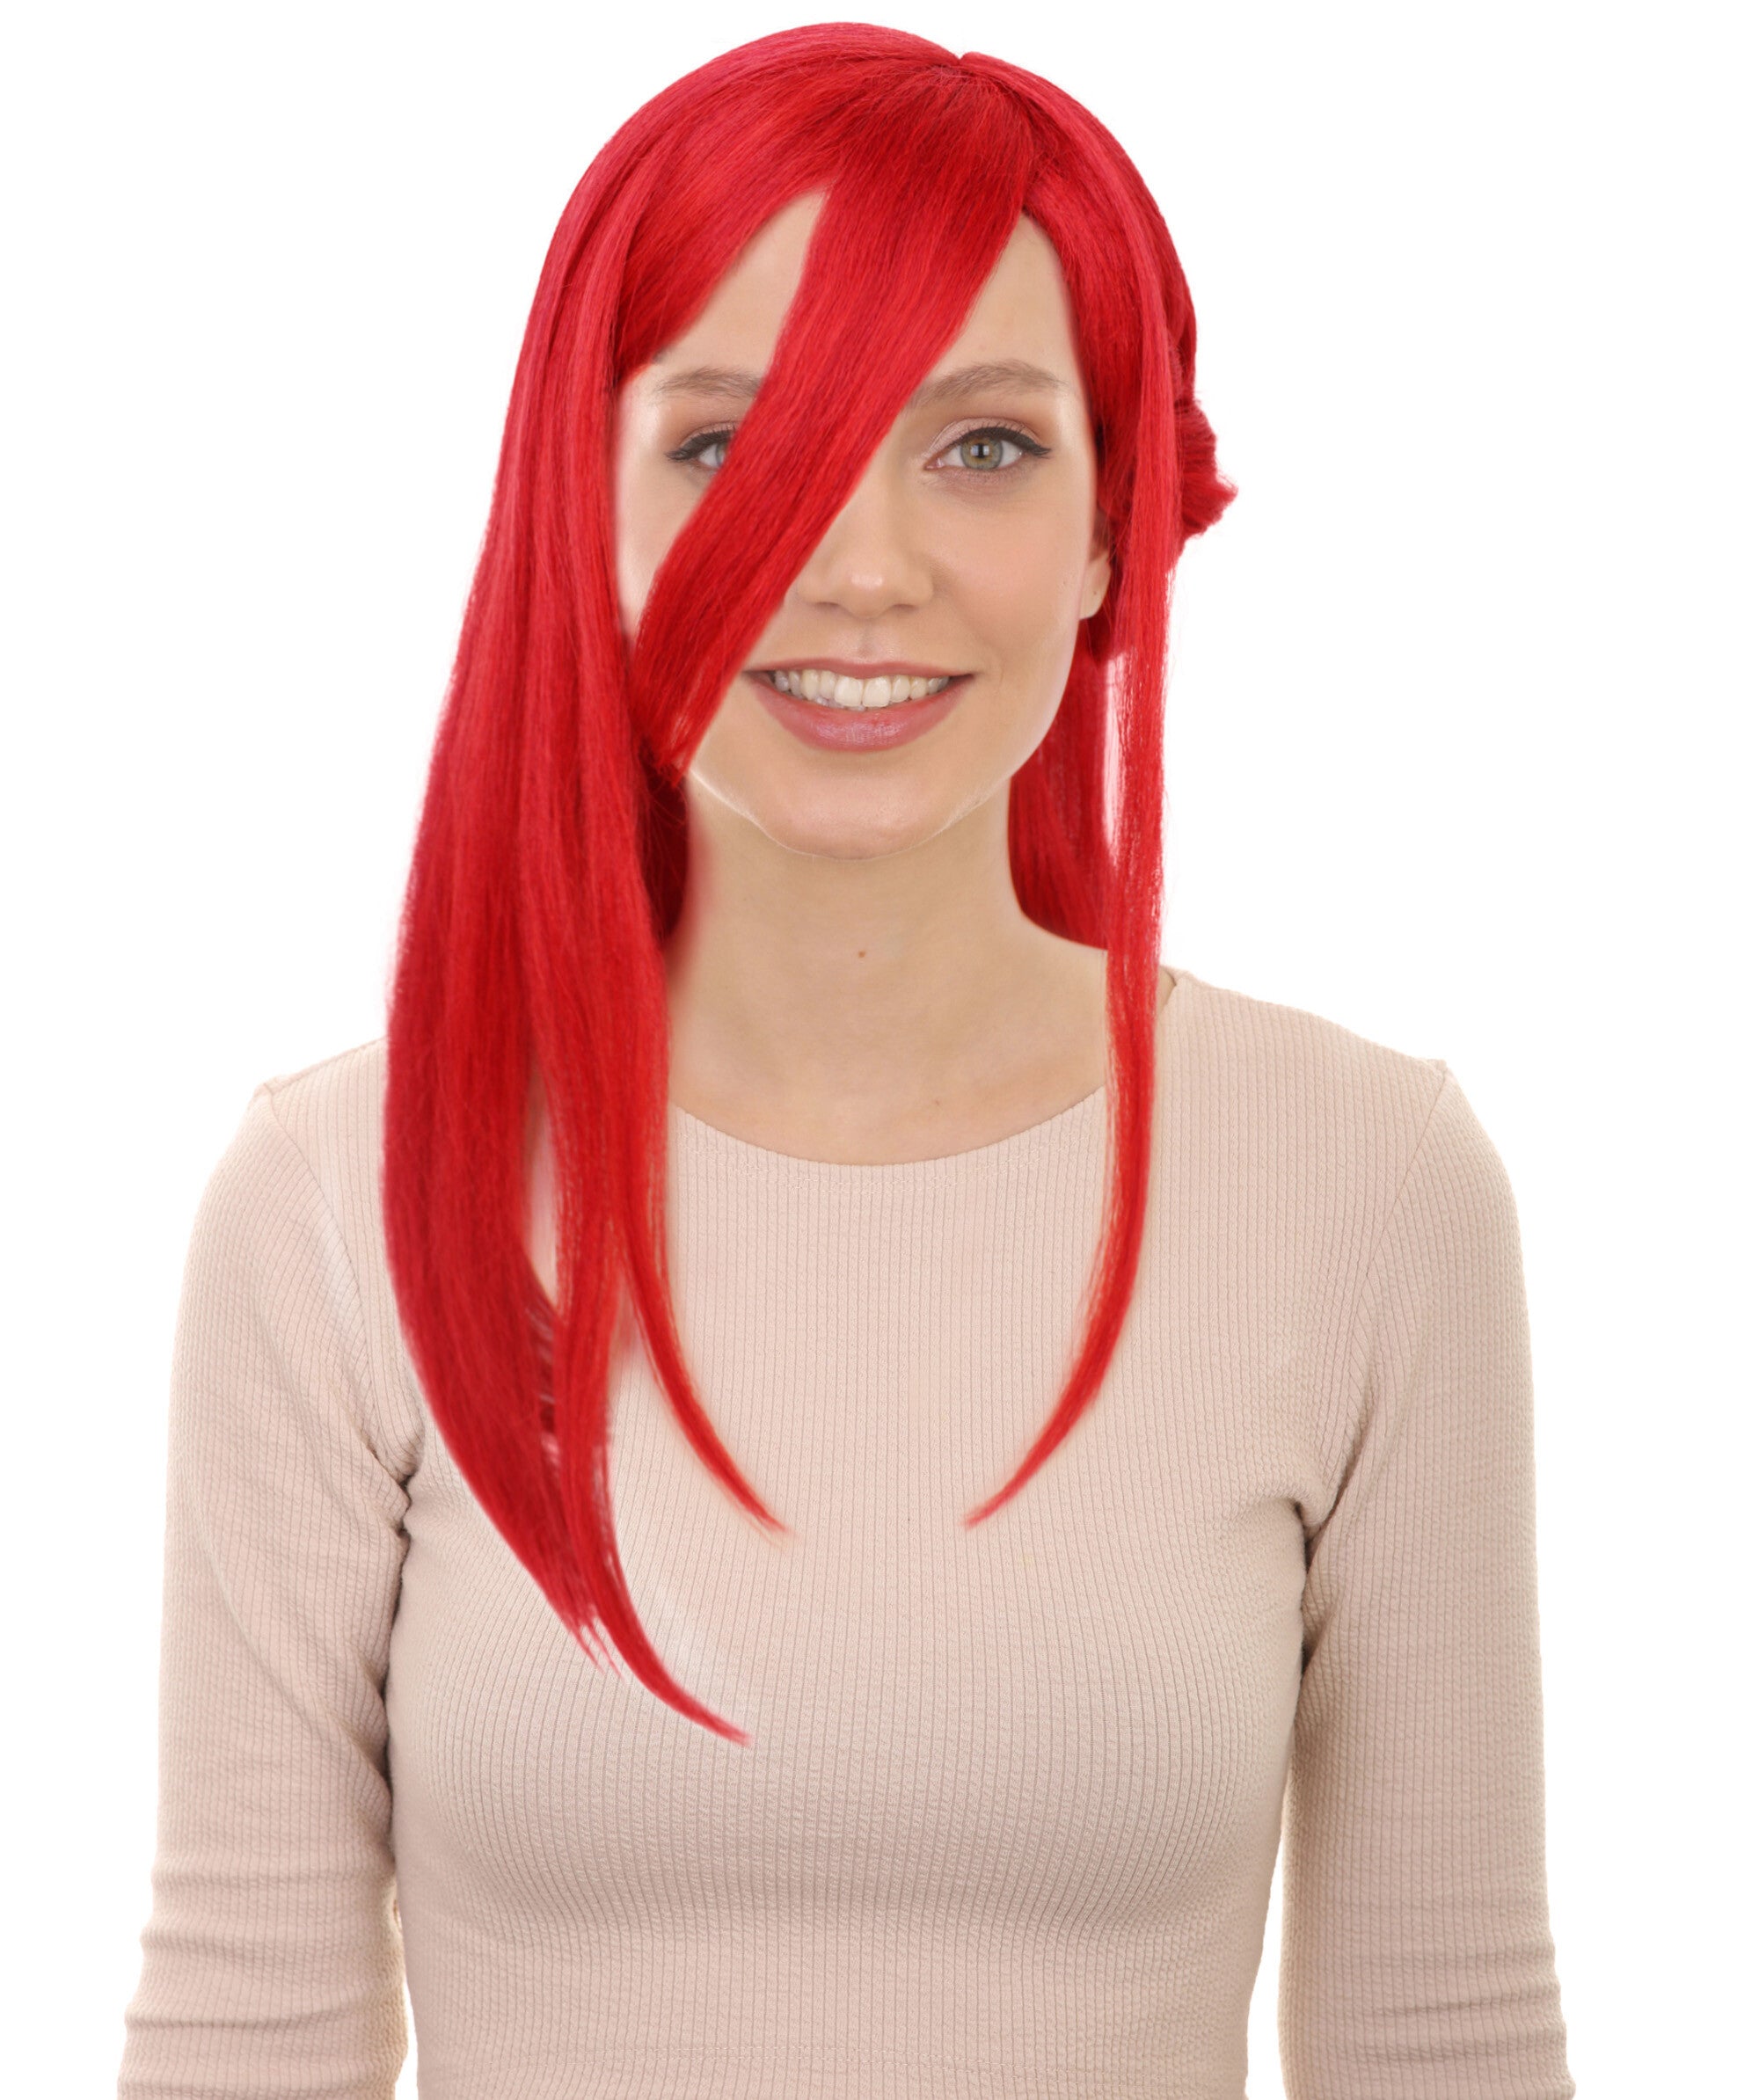 HPO Adult Unisex Soccer Anime Long Red Cosplay Wig with Side Braids I Perfect for Halloween I Flame retardant Synthetic Fiber